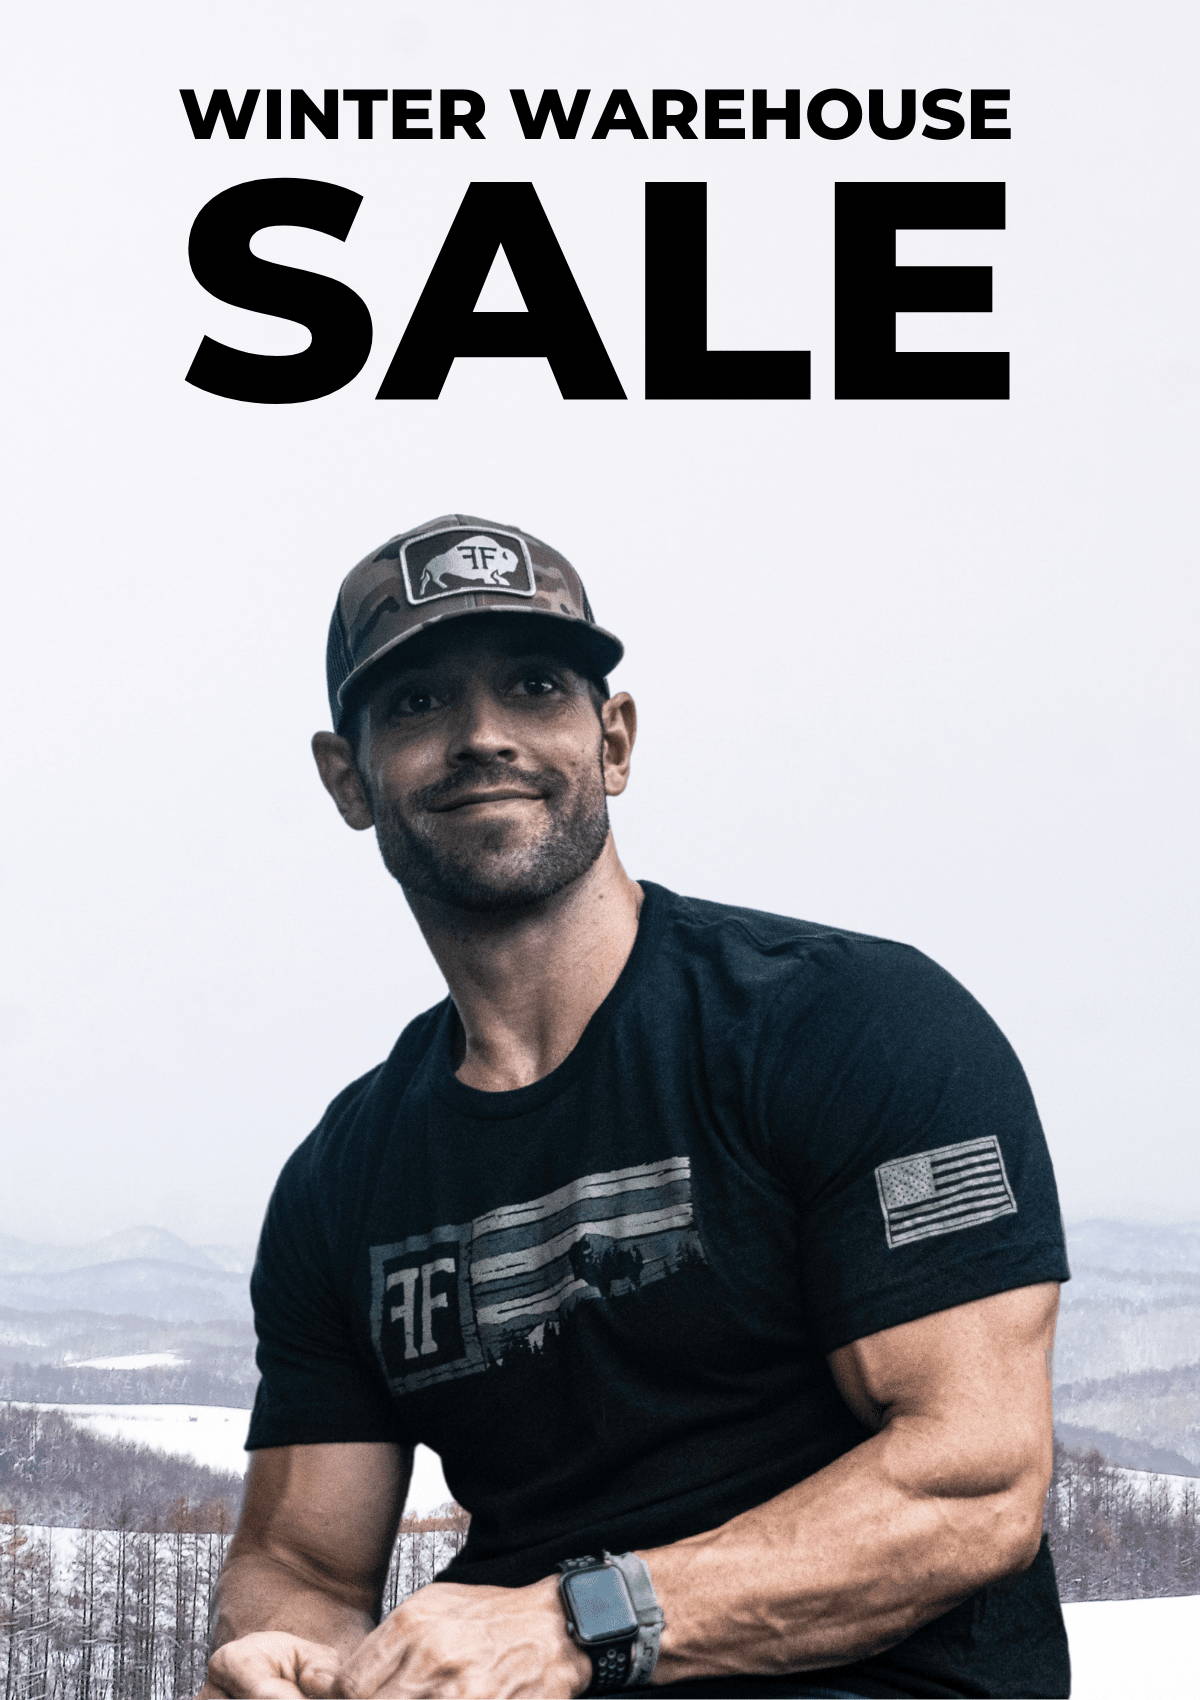 froning farms rich froning winter warehouse sale